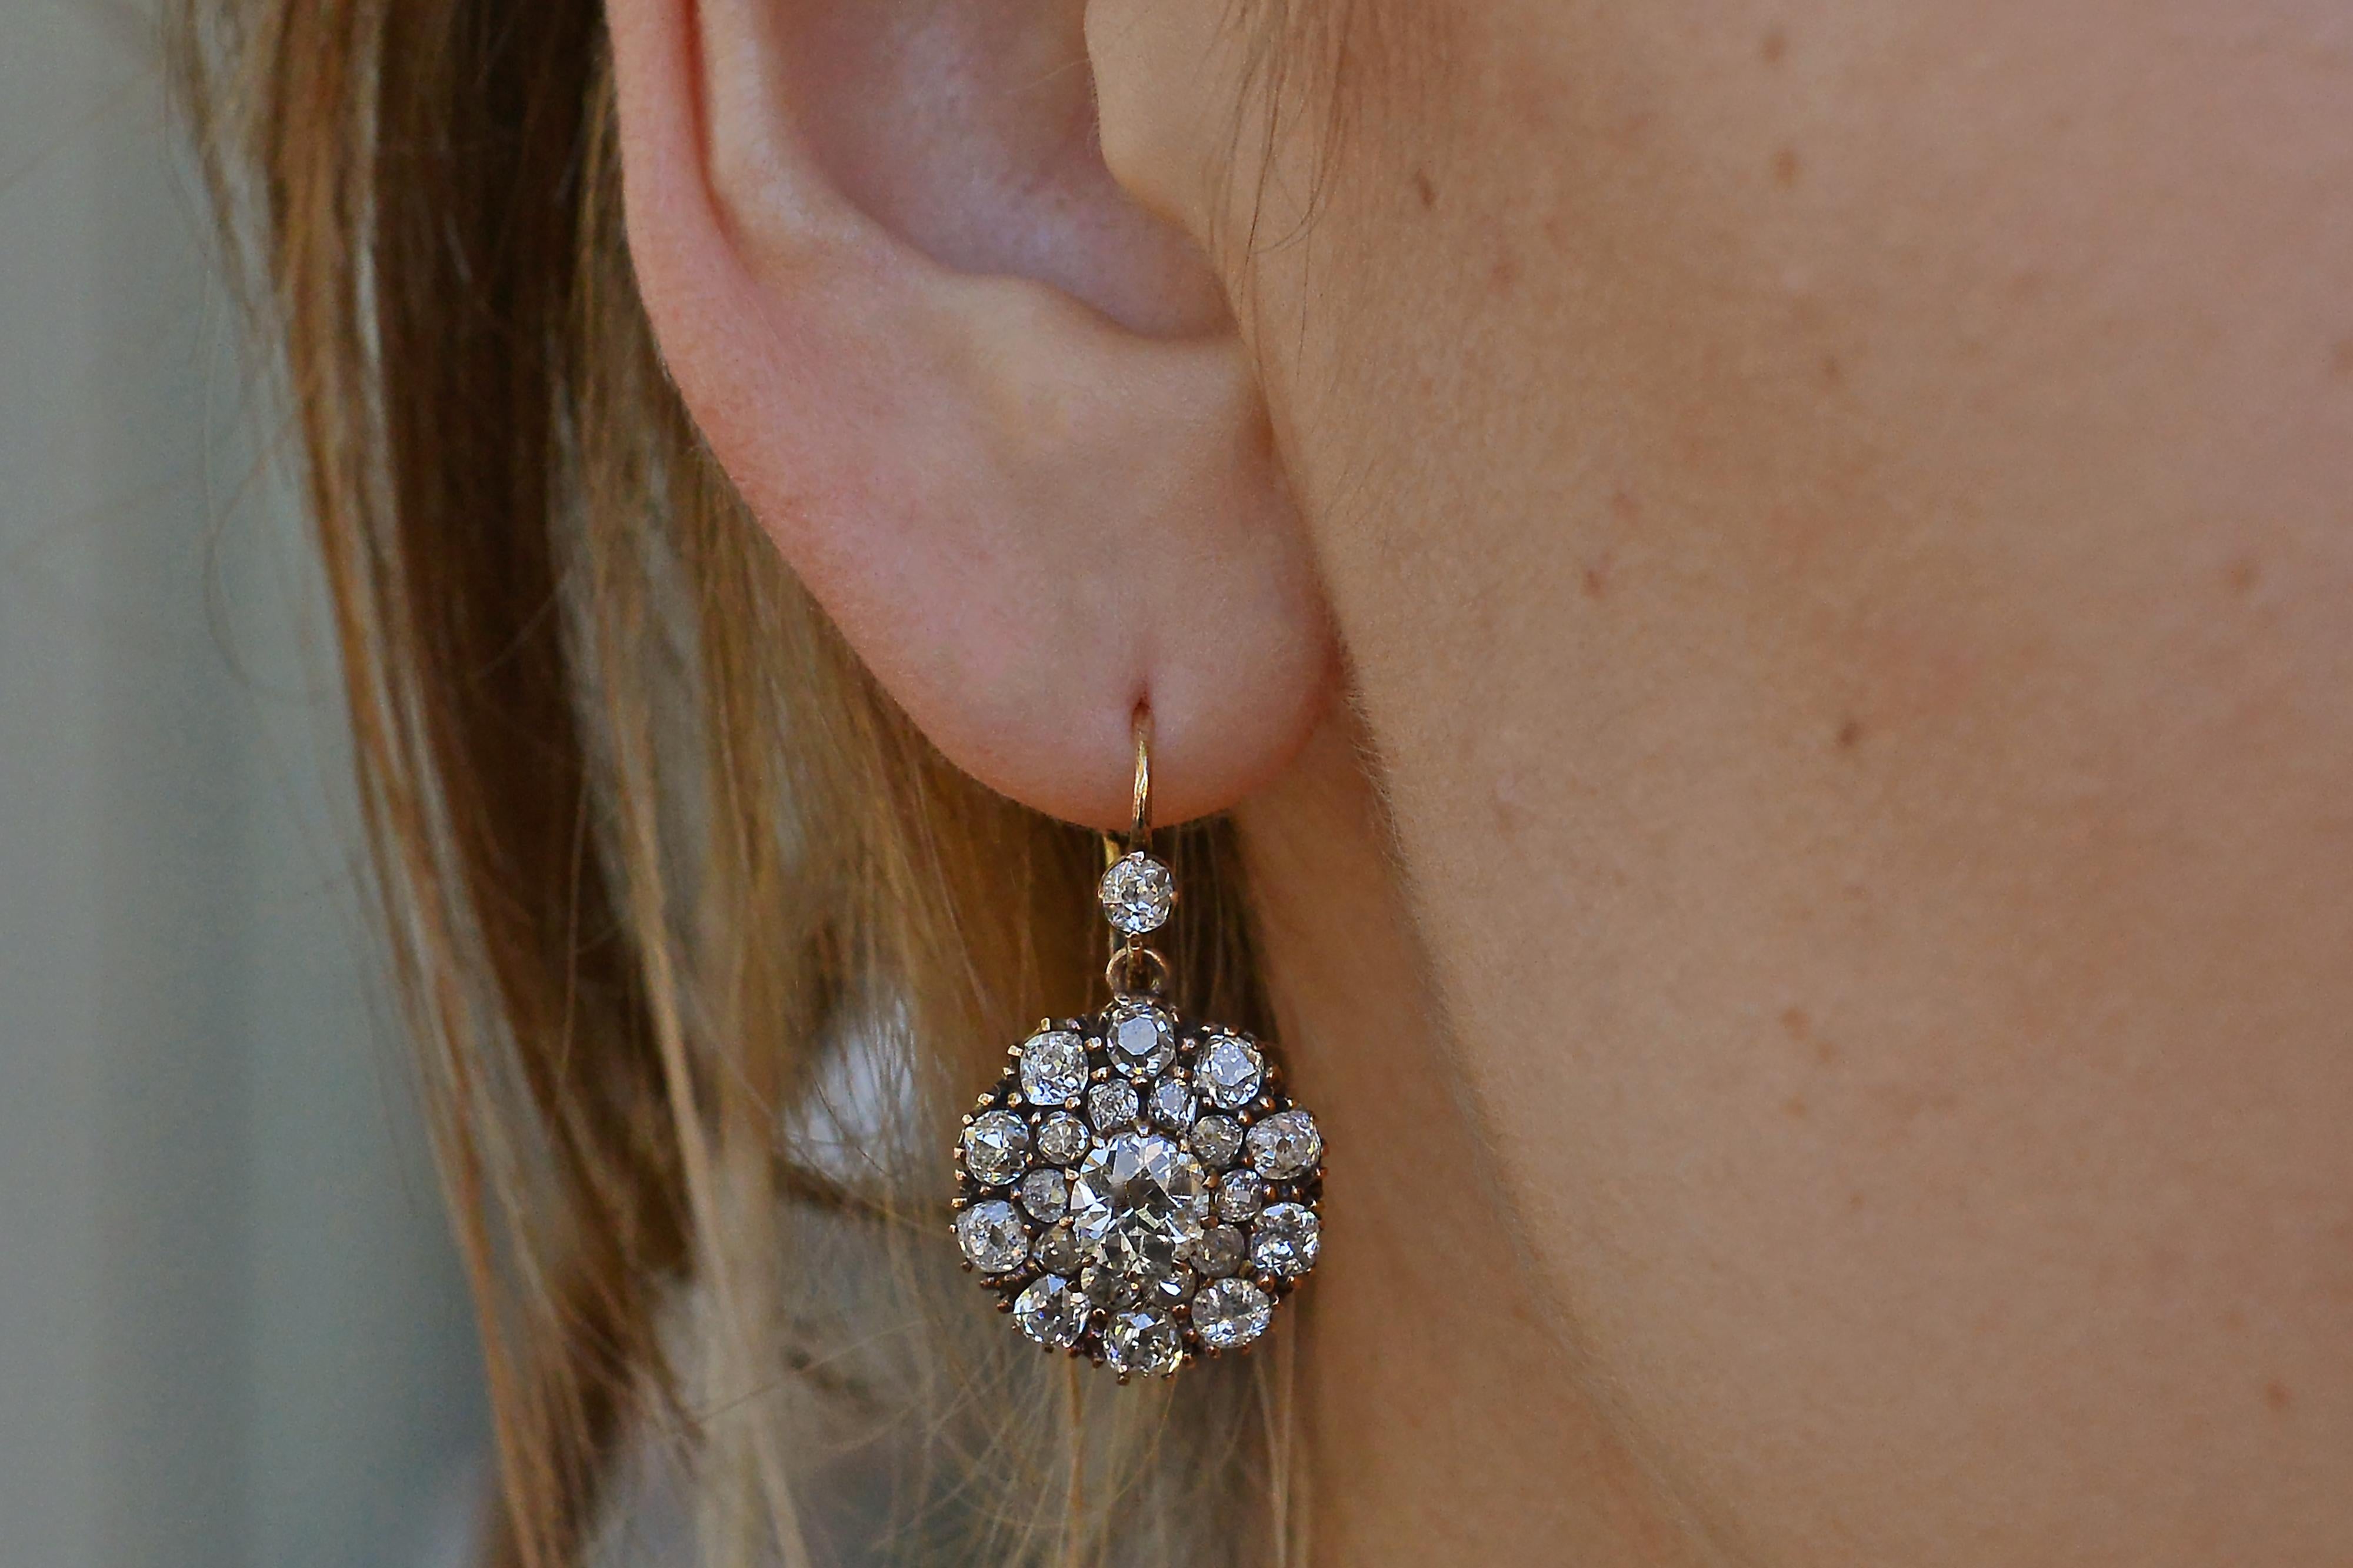 An antique bombshell pair of earrings bursting with incredible glimmer and glamour. This authentic late 1800s Victorian set is loaded with classically elegant old mine cut diamonds that allow the light to dance within them as they dangle on your